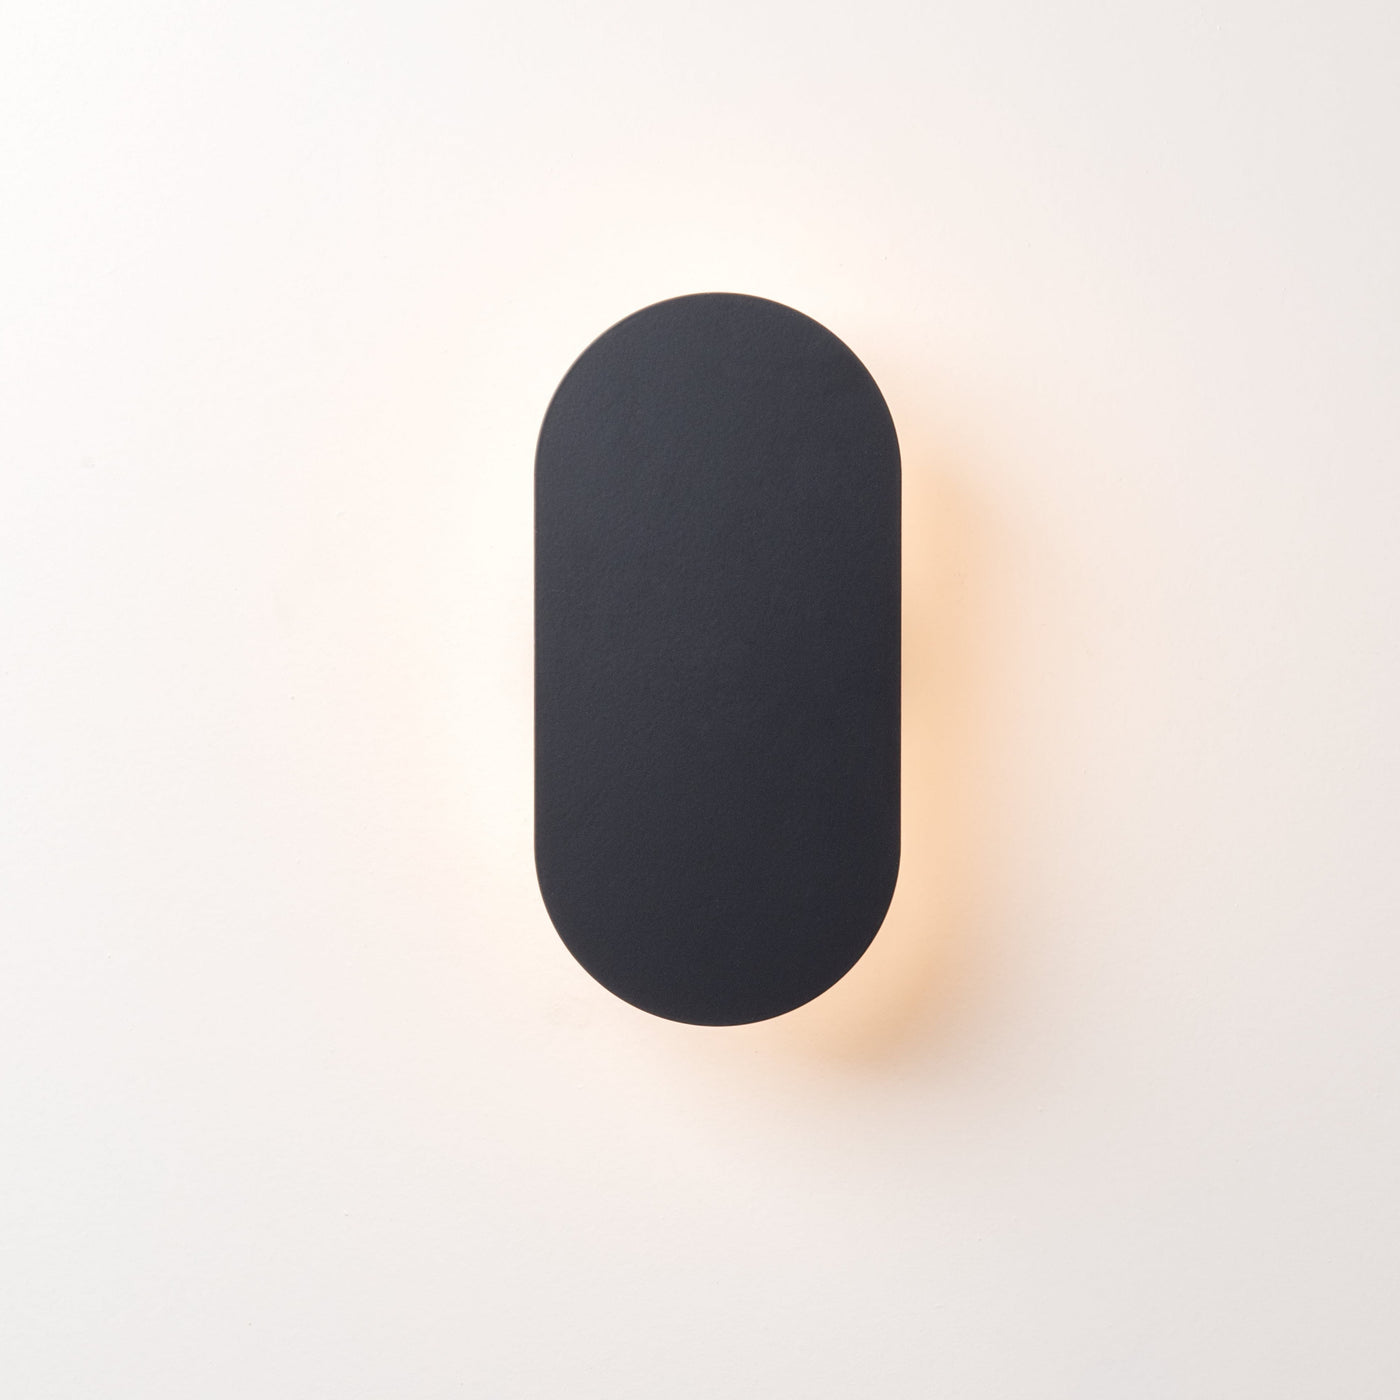 mini diffuser wall lights by houseof.